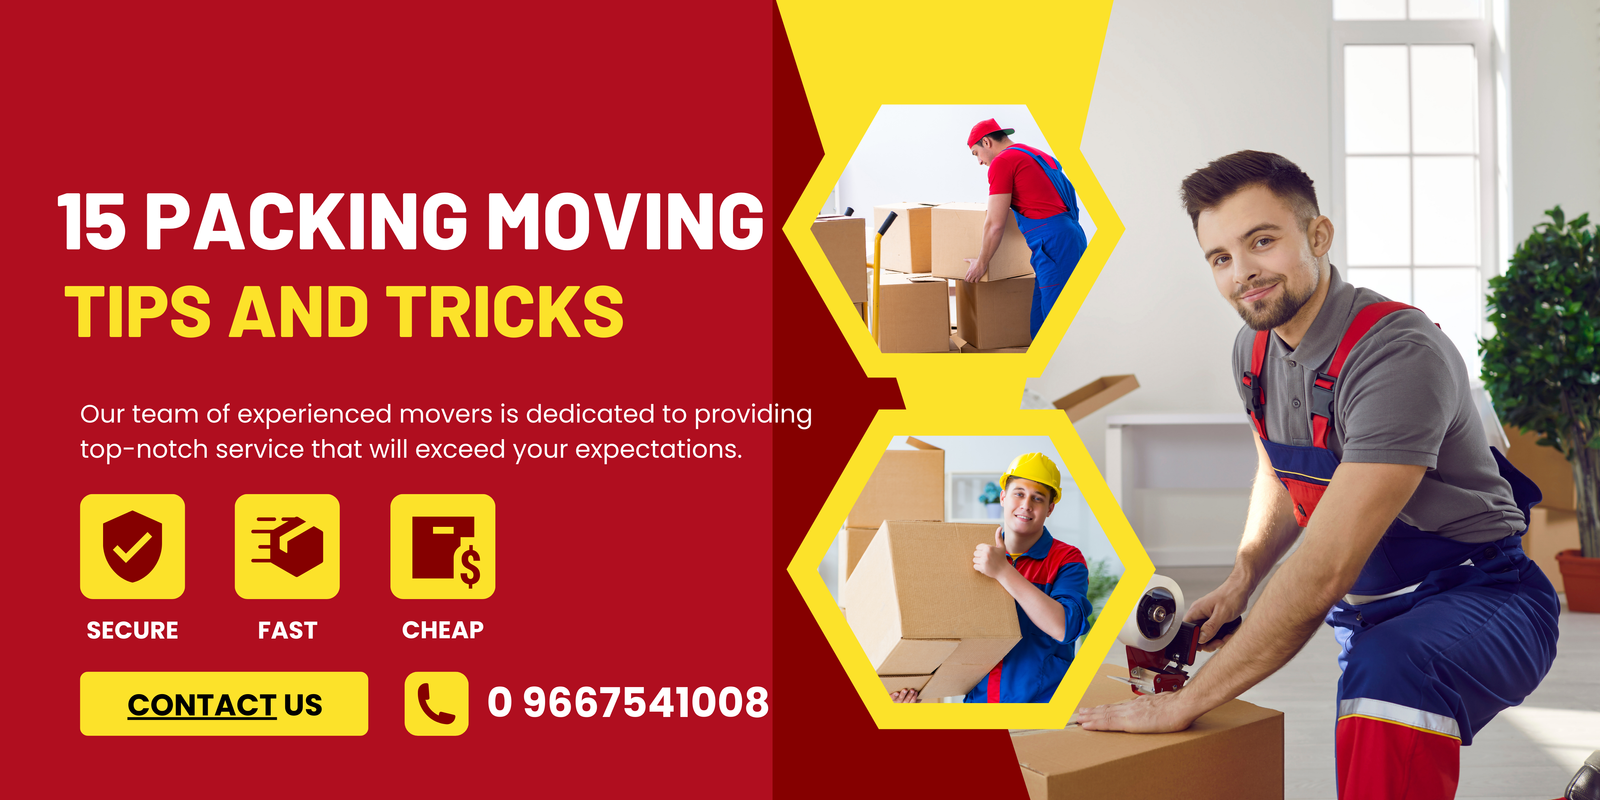 15 Packing Moving Tips and Tricks